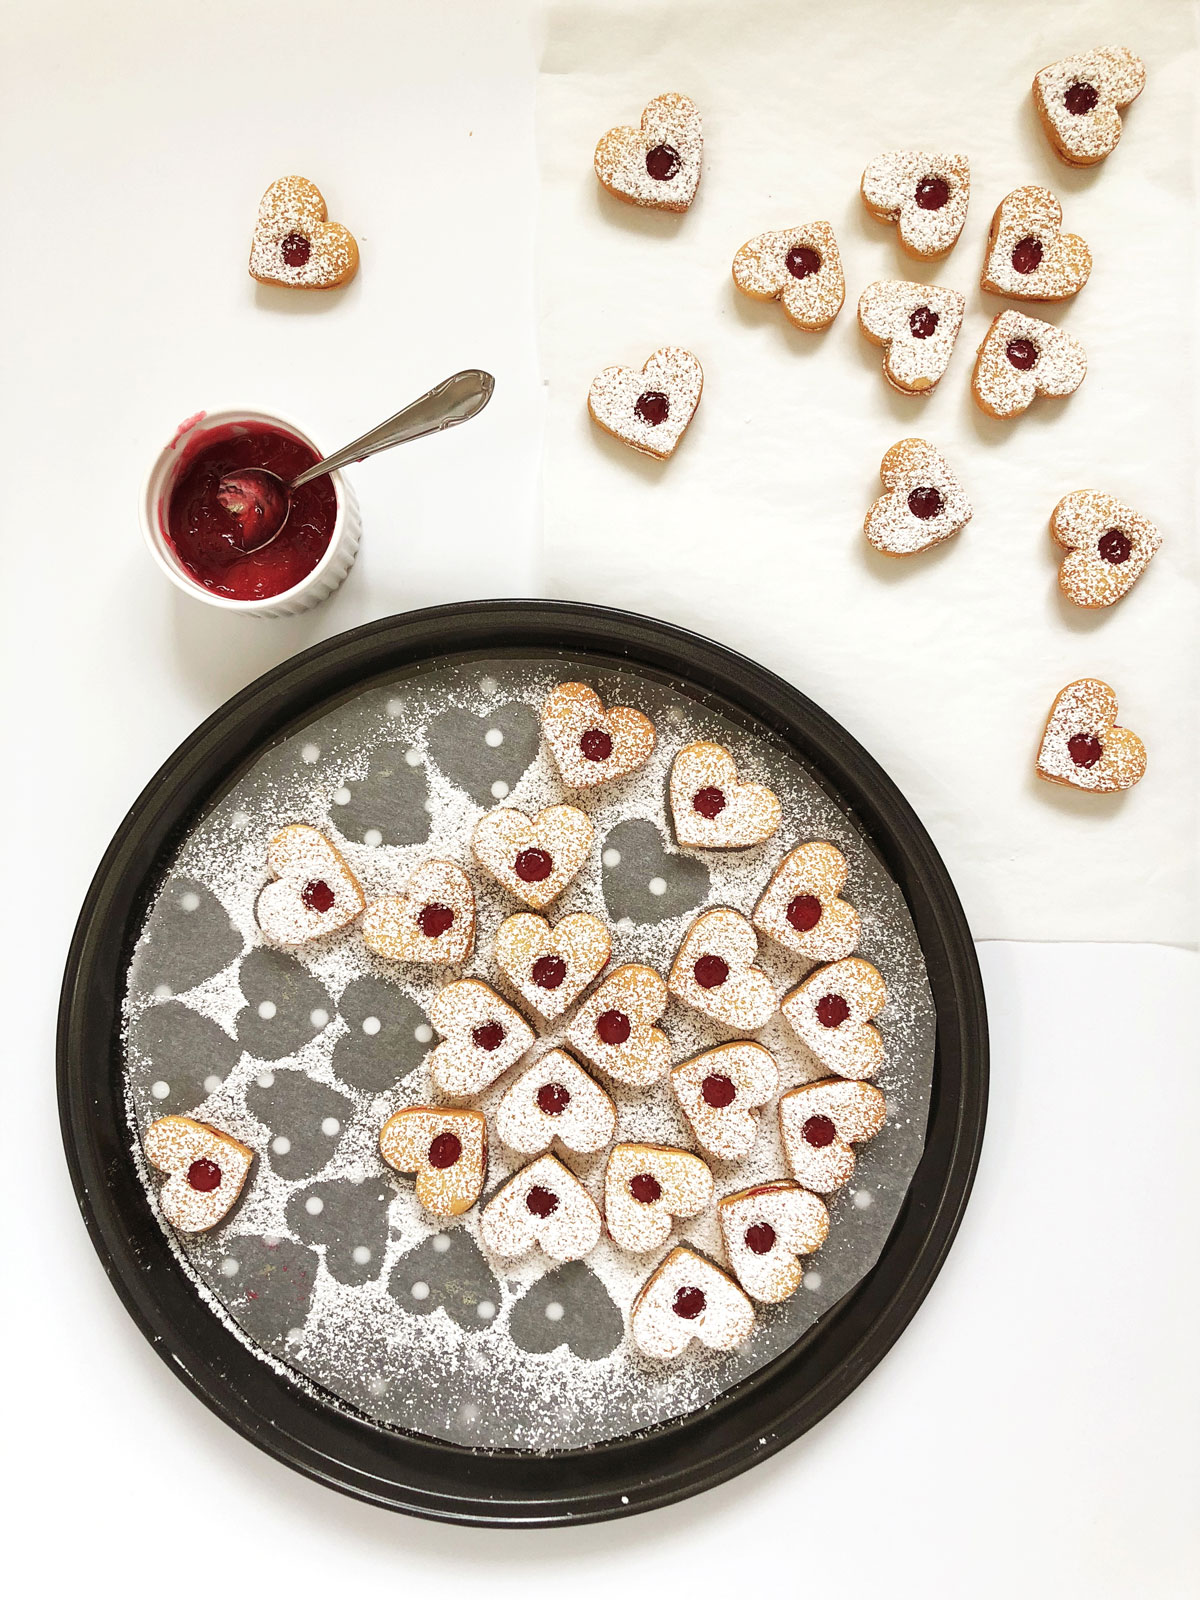 Small jam filled biscuits arranged on a round sheet with jam in a small bowl on the side.